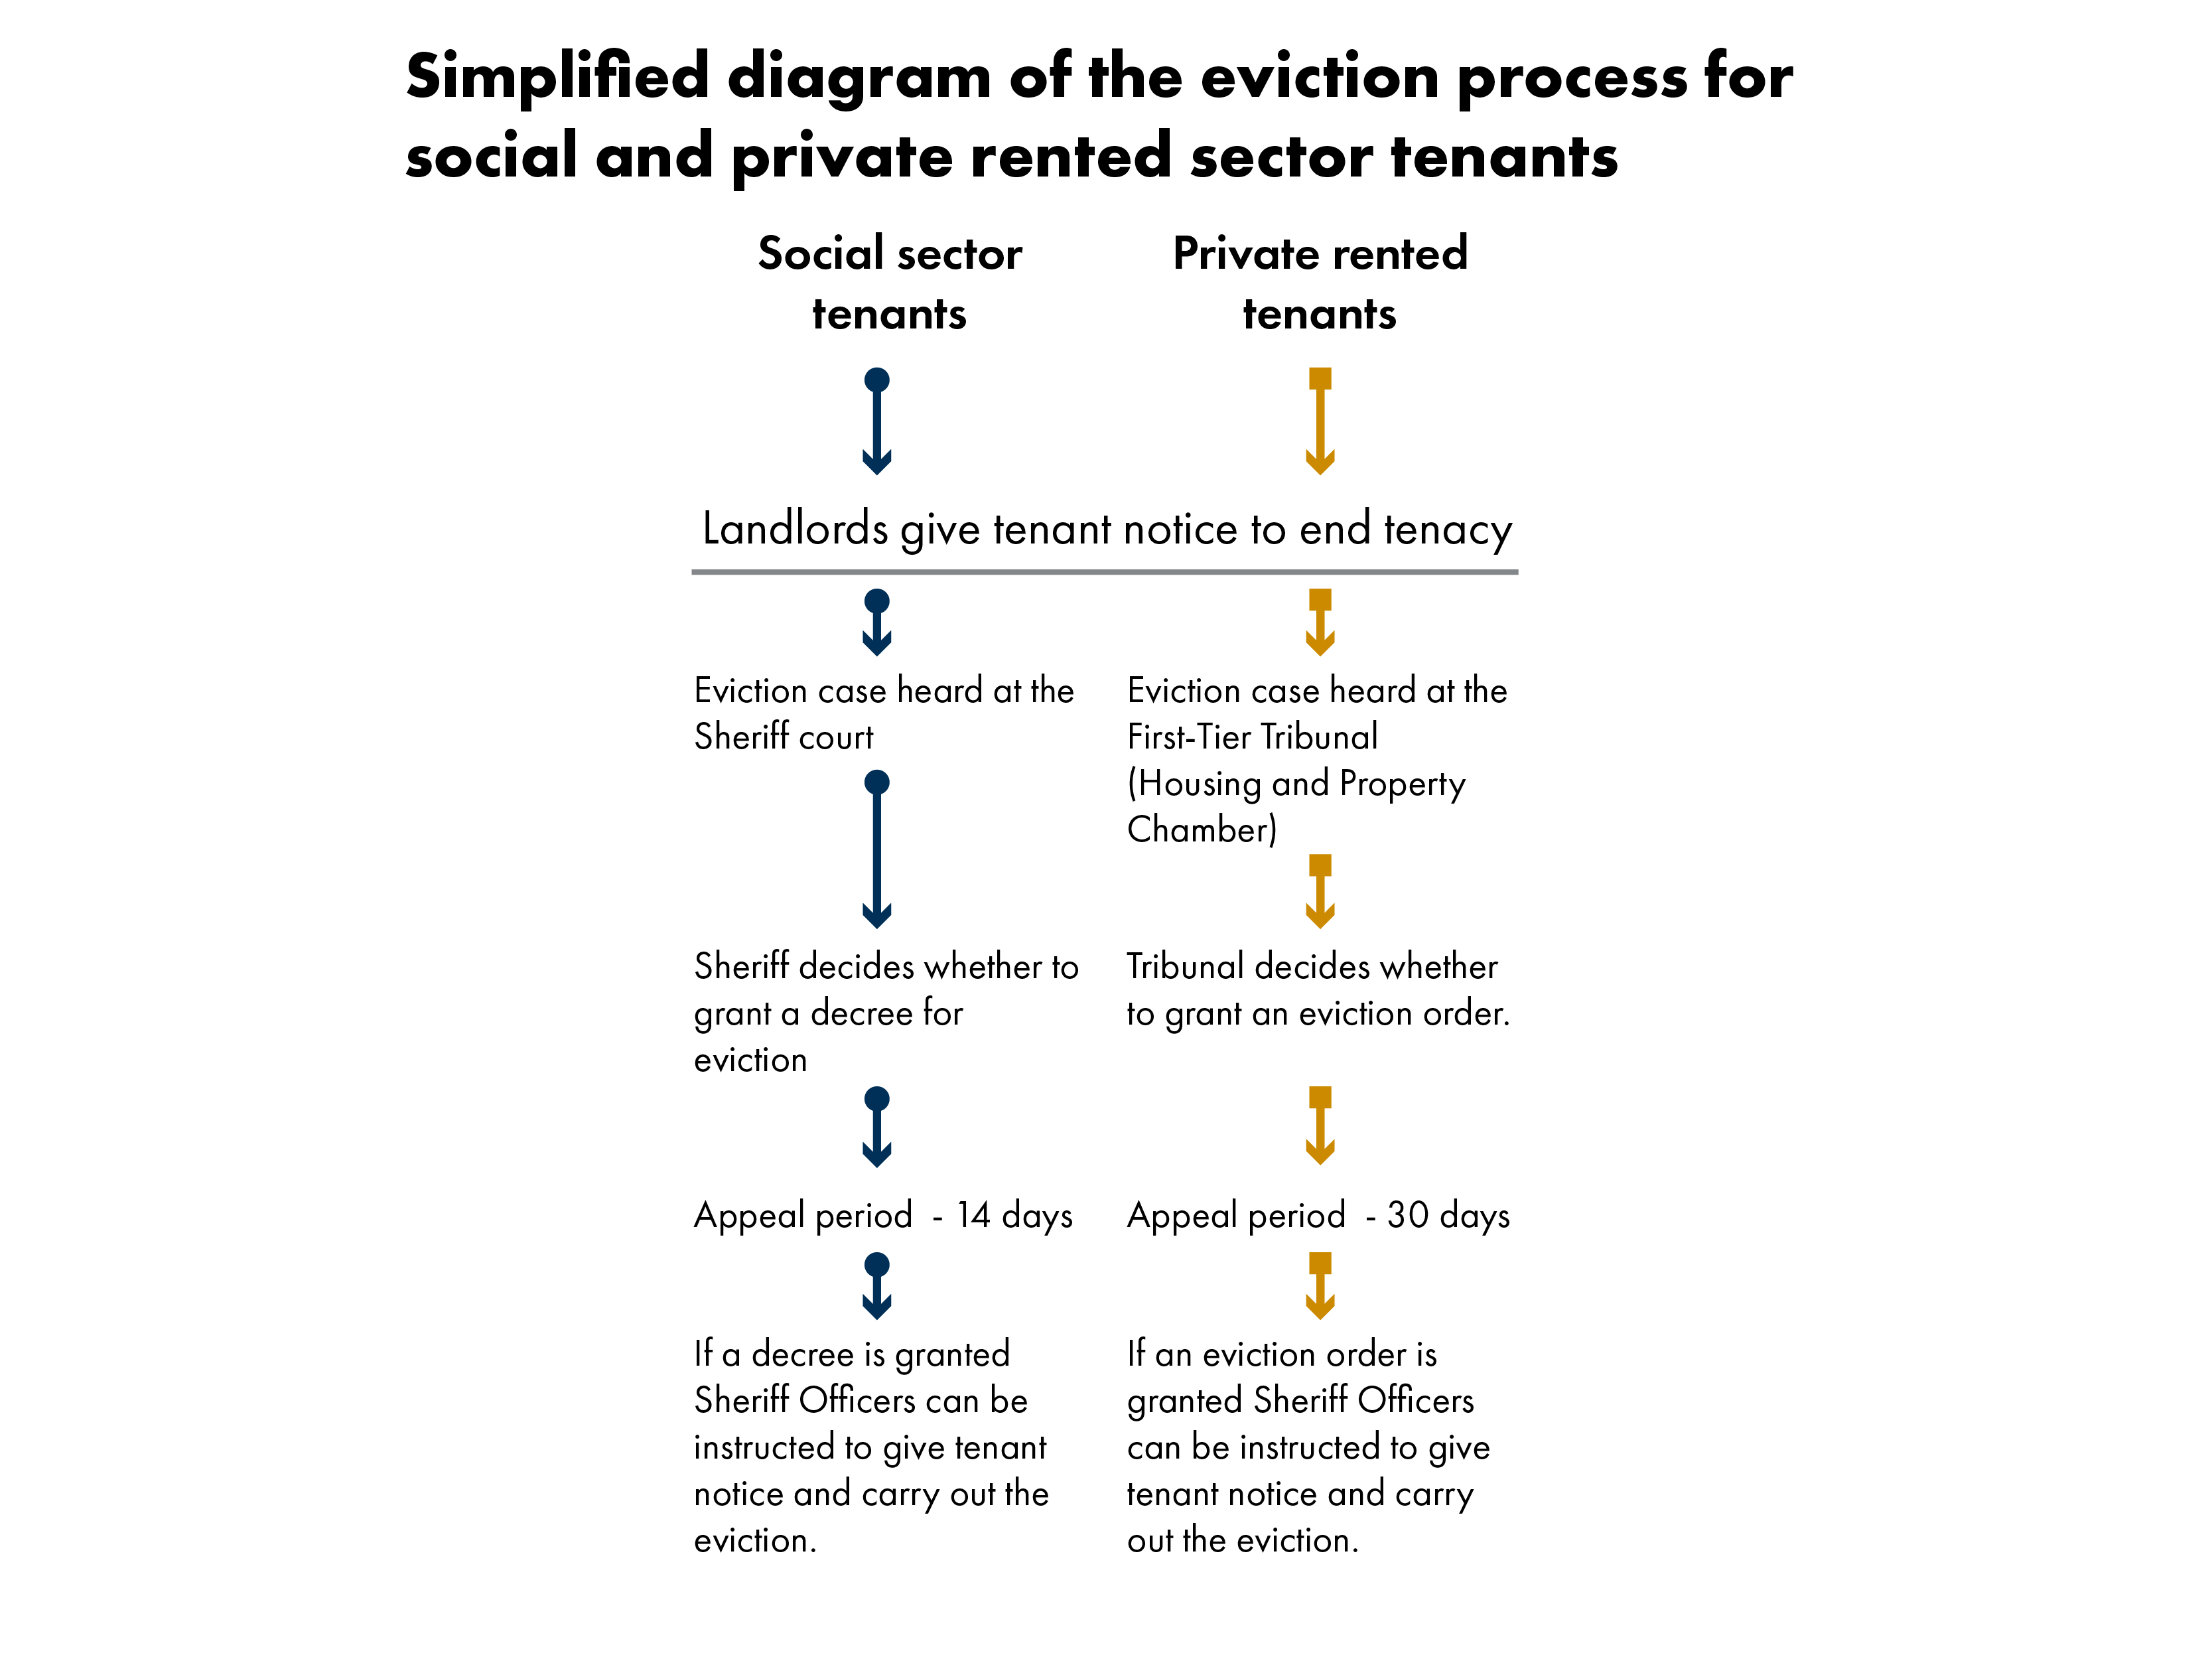 This shows a simplified diagram of the steps in the eviction process